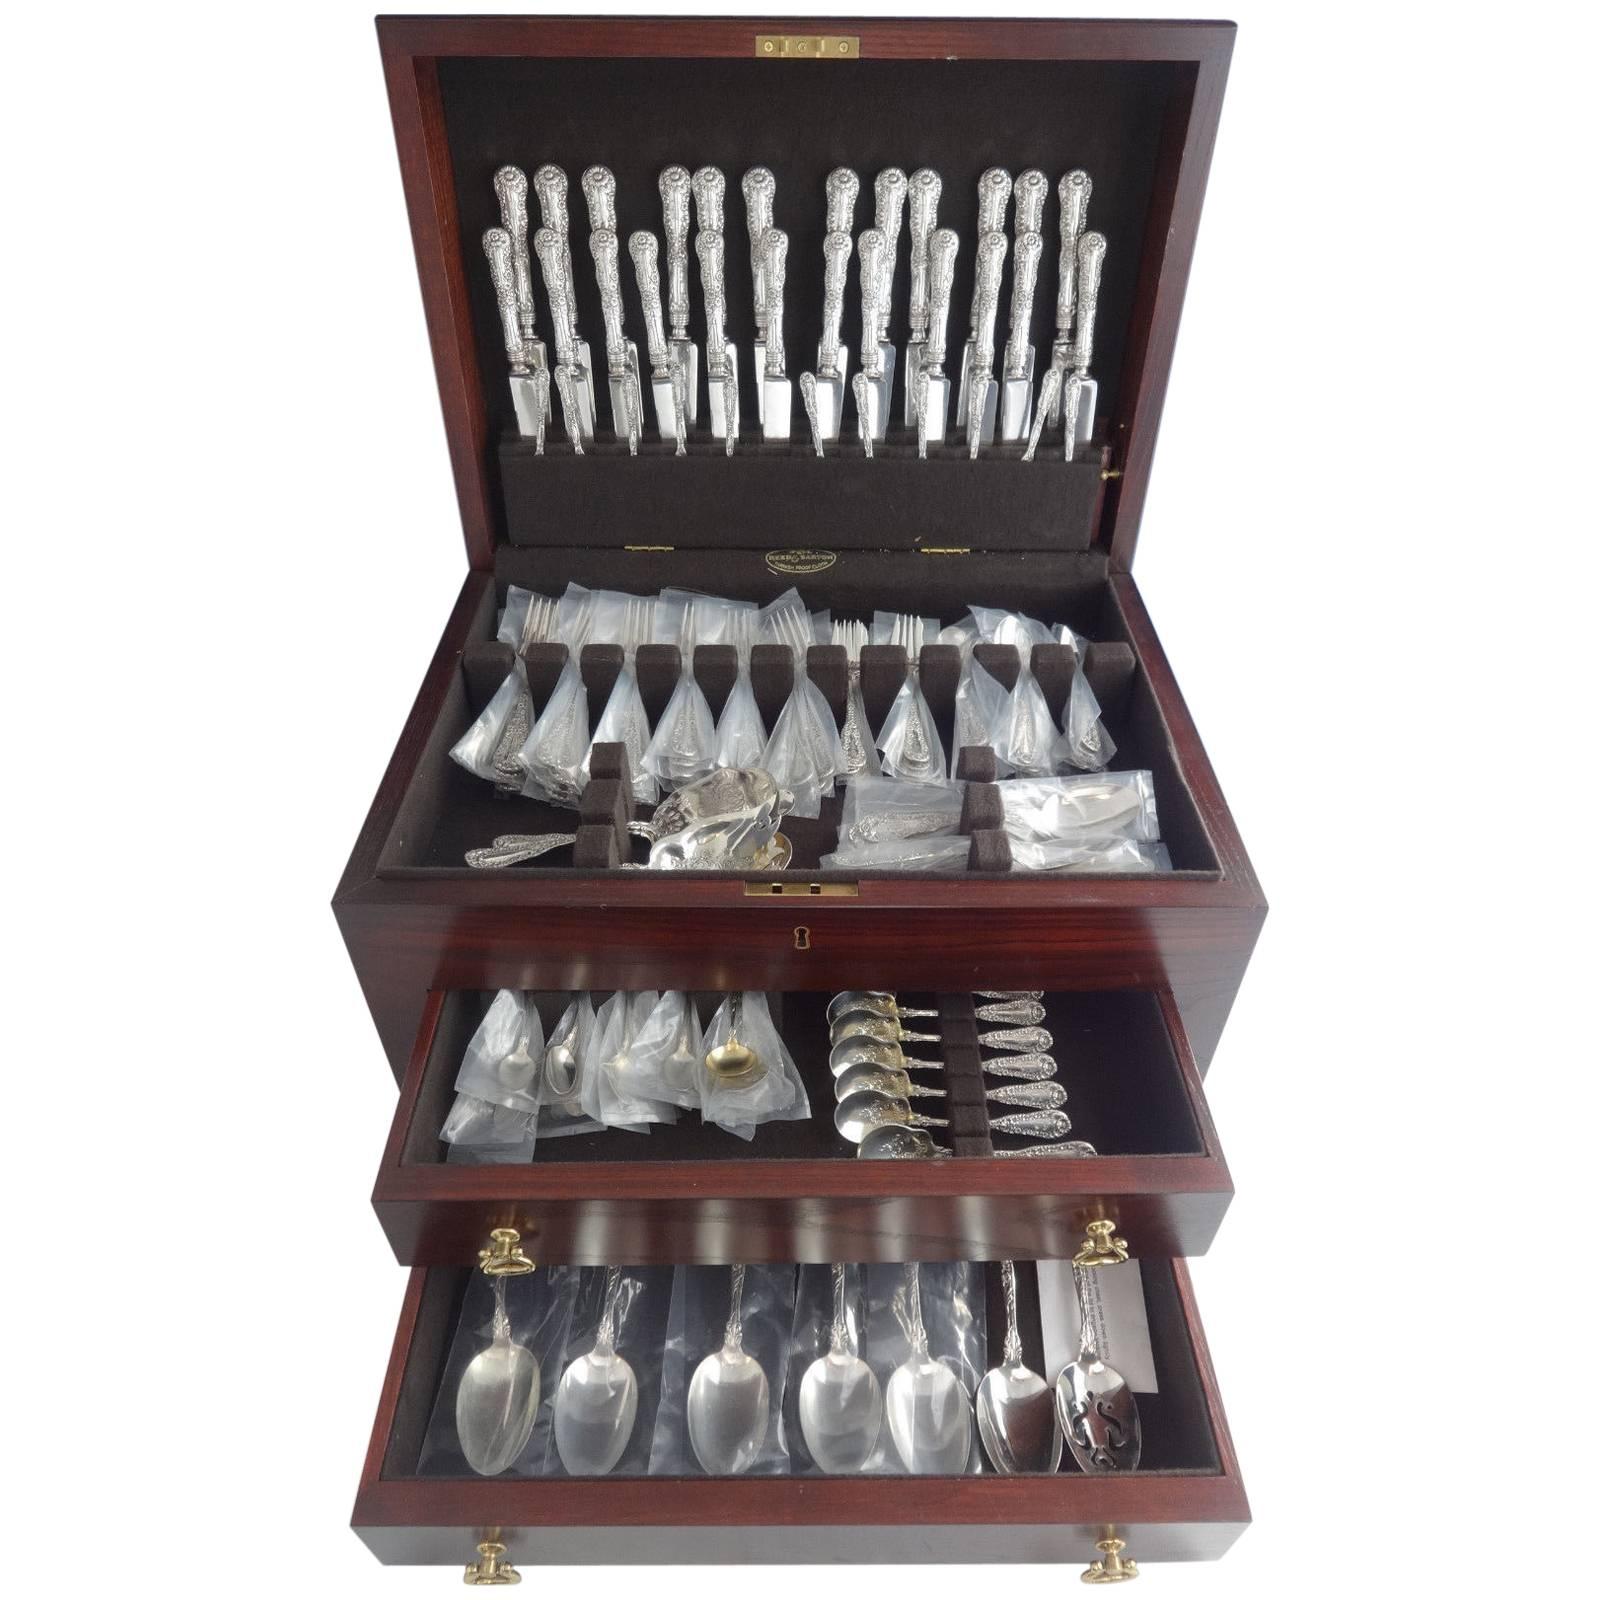 Exceptional monumental Number 10 Ten by Dominick & Haff sterling silver flatware set of 126 pieces. This set includes:

12 dinner knives 9 7/8